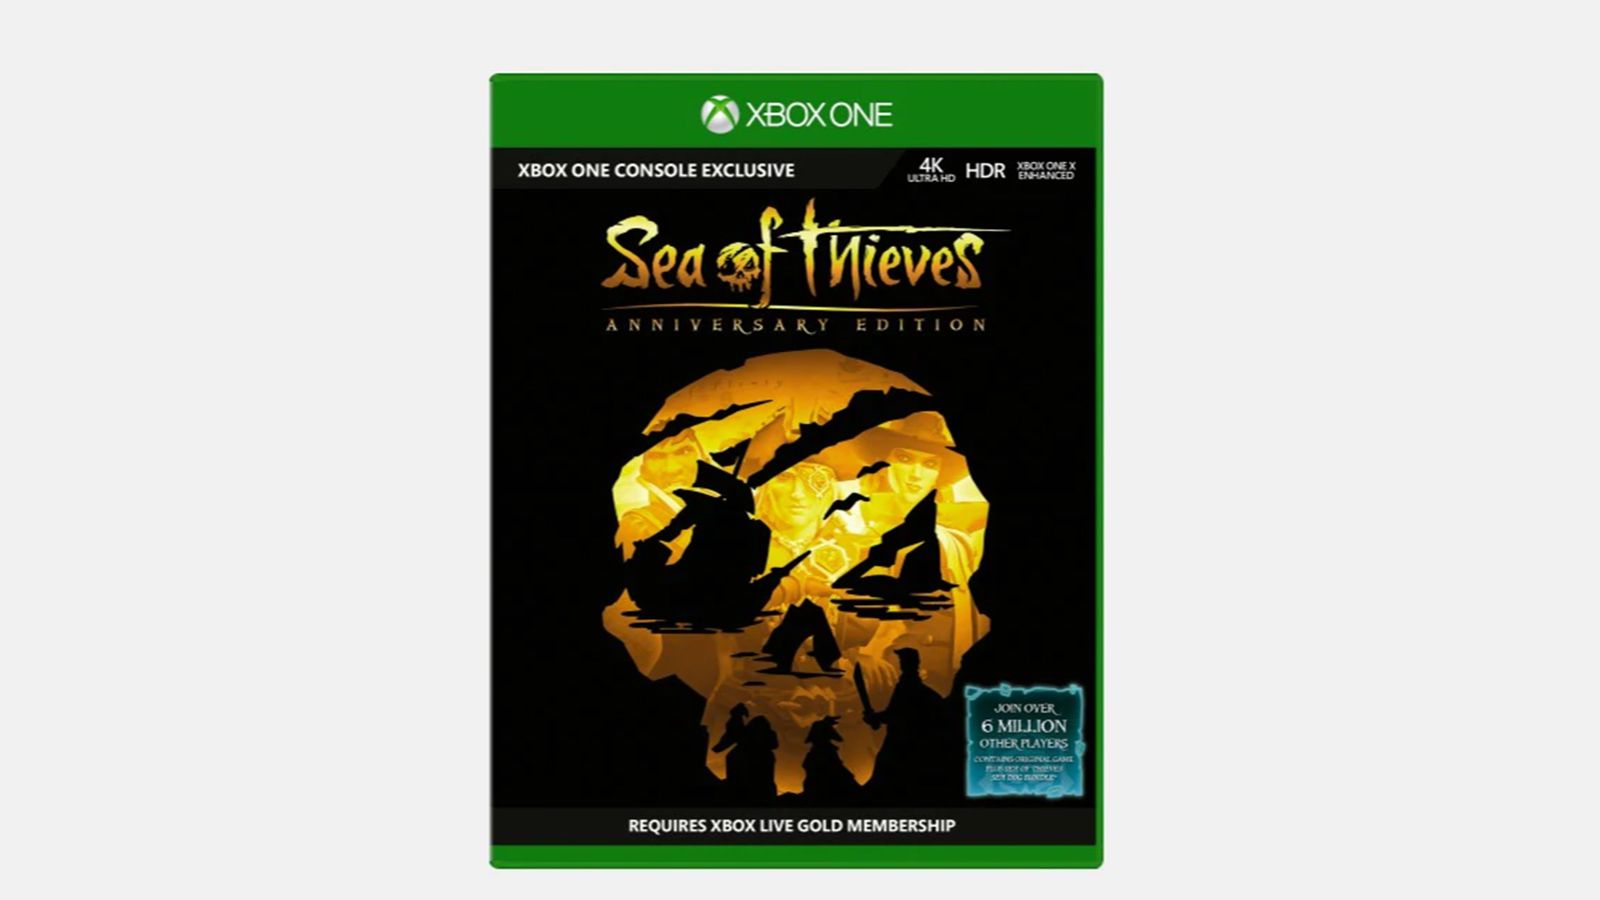 Prove yourself in contests of treasure hunting and seafaring, or embark on a voyage to explore the world of pirates with your trusty crew. <strong>Sea of Thieves: Anniversary Edition ($29.99, originally $59.99; </strong><a href="https://click.linksynergy.com/deeplink?id=Fr/49/7rhGg&mid=24542&u1=0607xboxe32019&murl=https%3A%2F%2Fwww.microsoft.com%2Fen-us%2Fp%2Fsea-of-thieves-anniversary-edition-for-xbox-one%2F90zgp7jd17sq%3Fcid%3Dmsft_web_collection%26activetab%3Dpivot%253aoverviewtab" target="_blank" target="_blank"><strong>microsoft.com</strong></a><strong>)</strong><br />